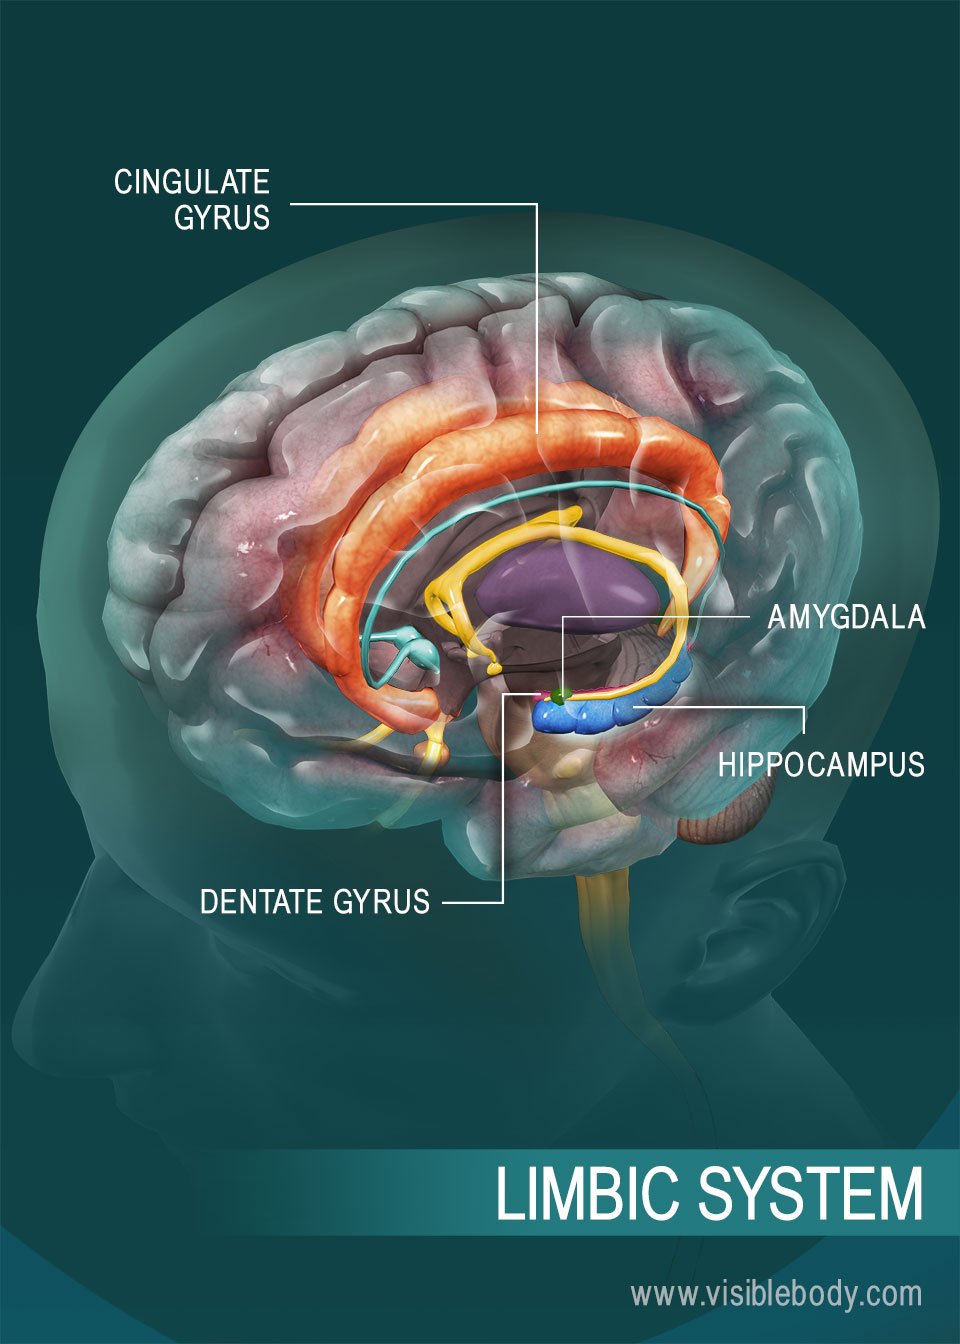 Overview of the limbic system